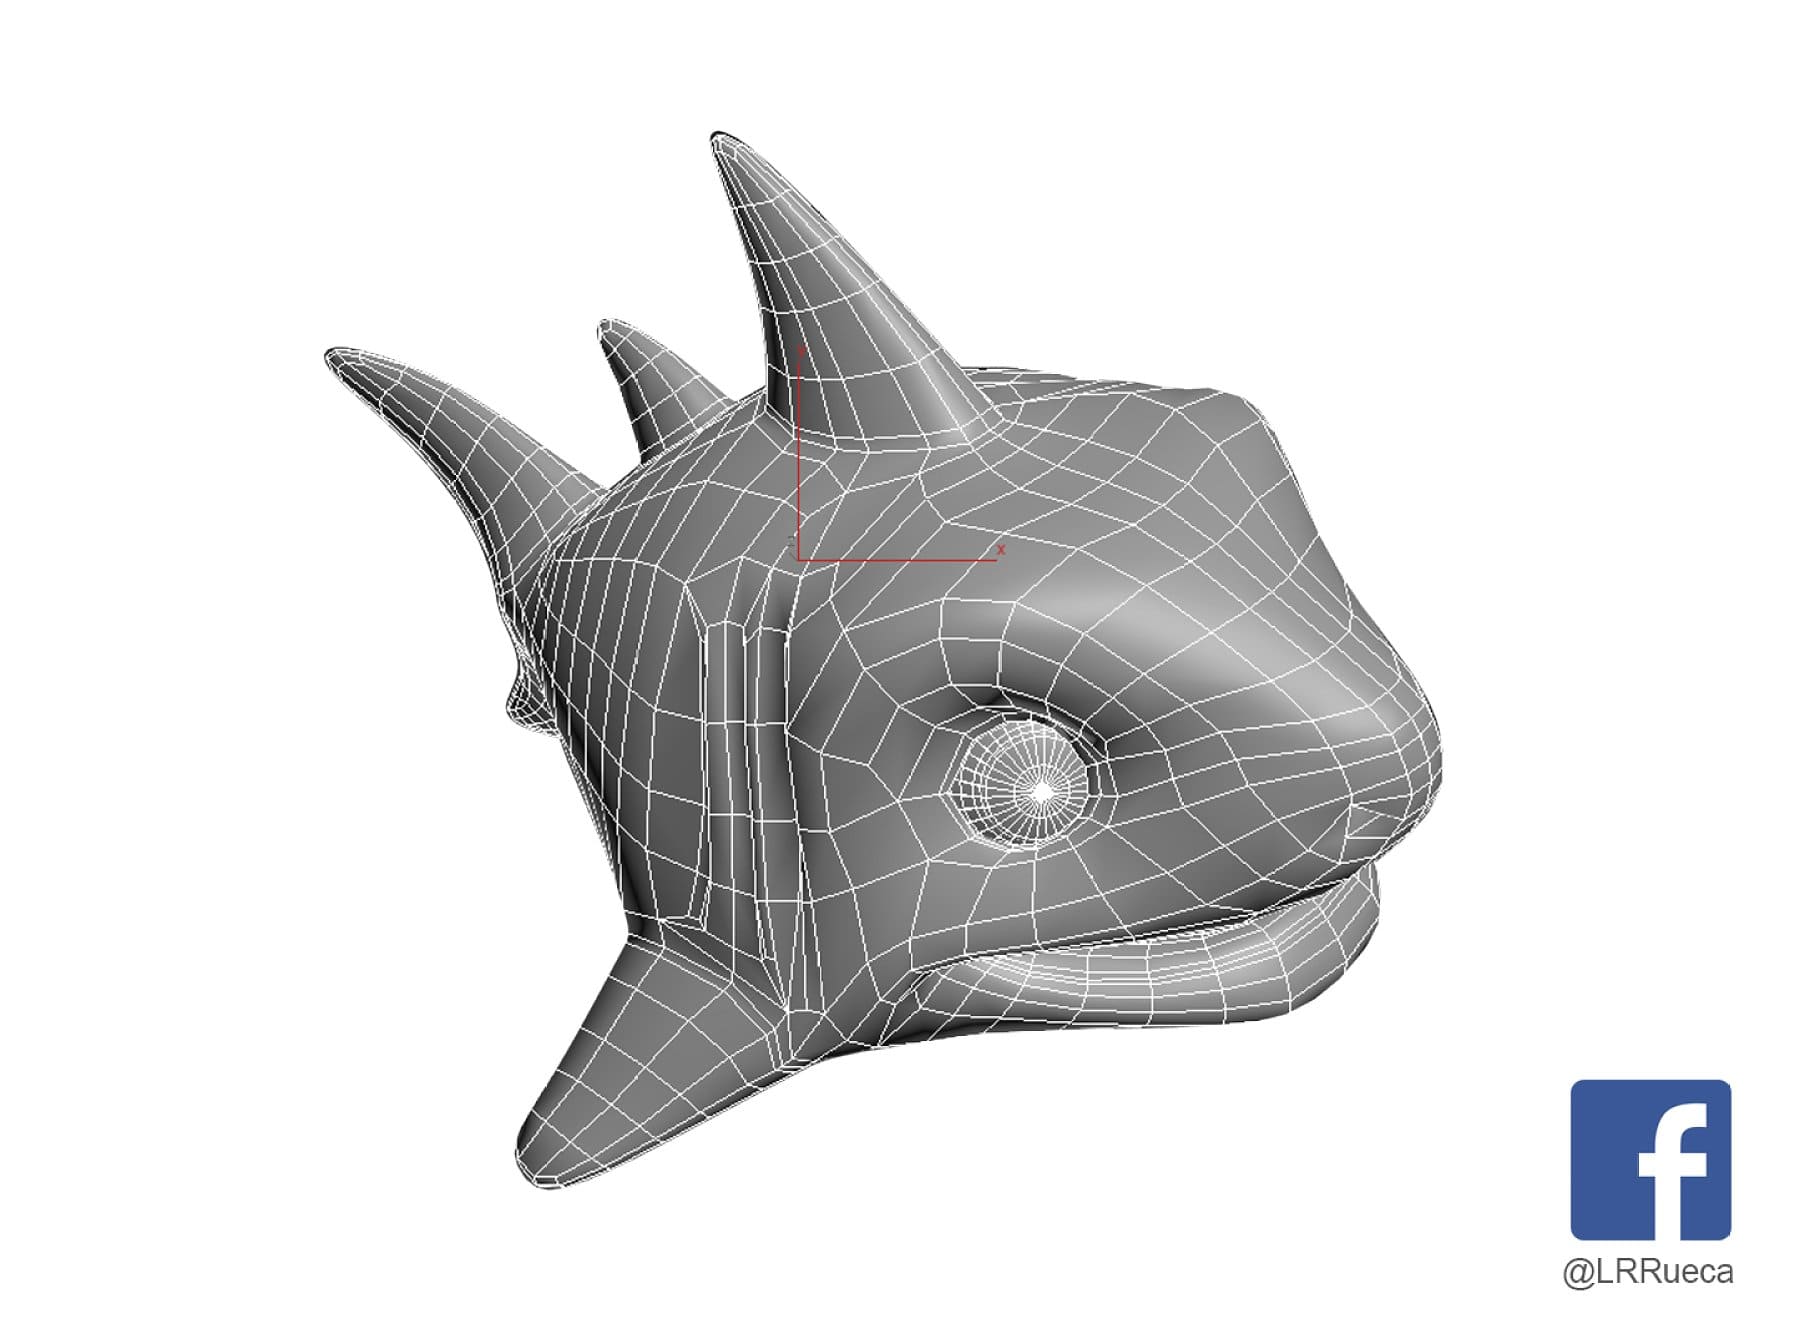 3D model of the upper right side of a stylized shark.